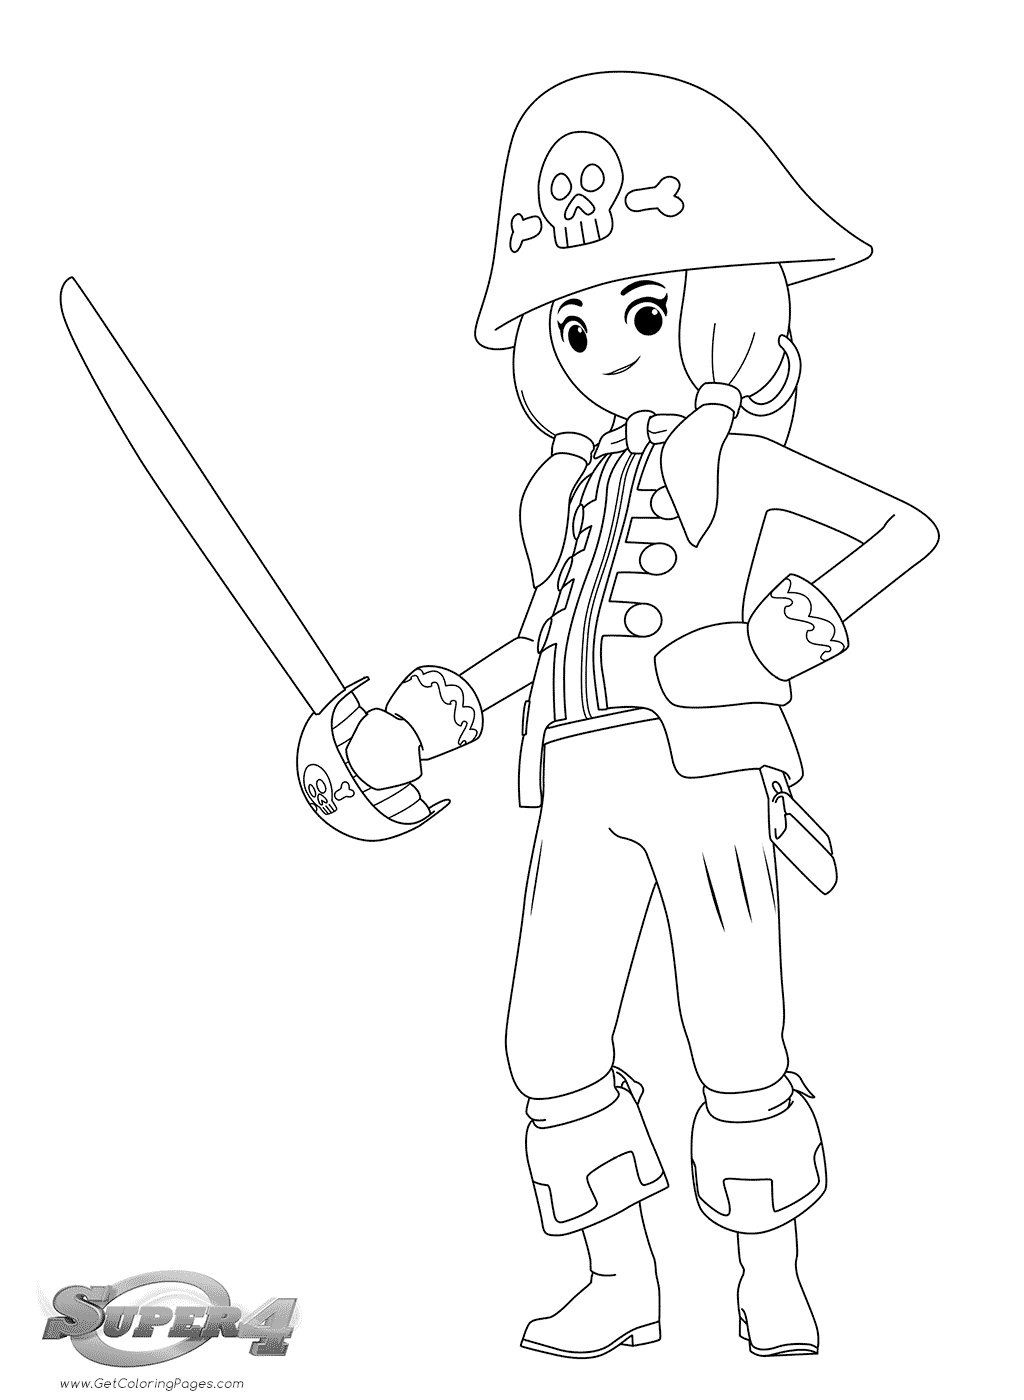 Playmobil Super 4 Coloring Pages Girl Pirate - Get Coloring Pages